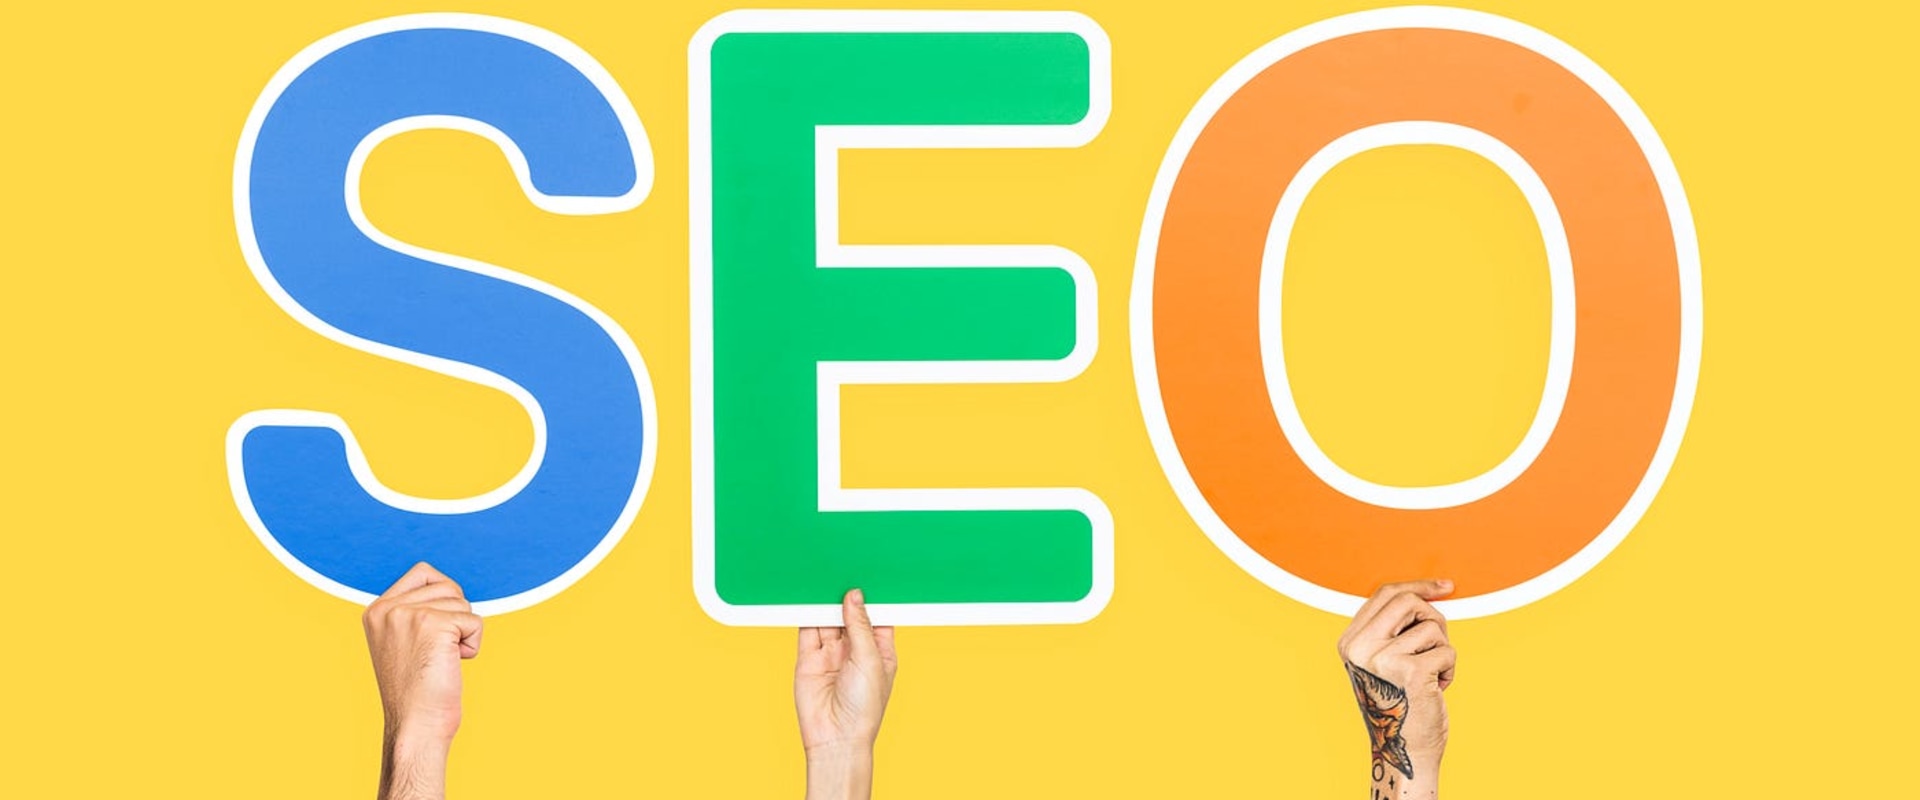 What are the benefits of local seo?